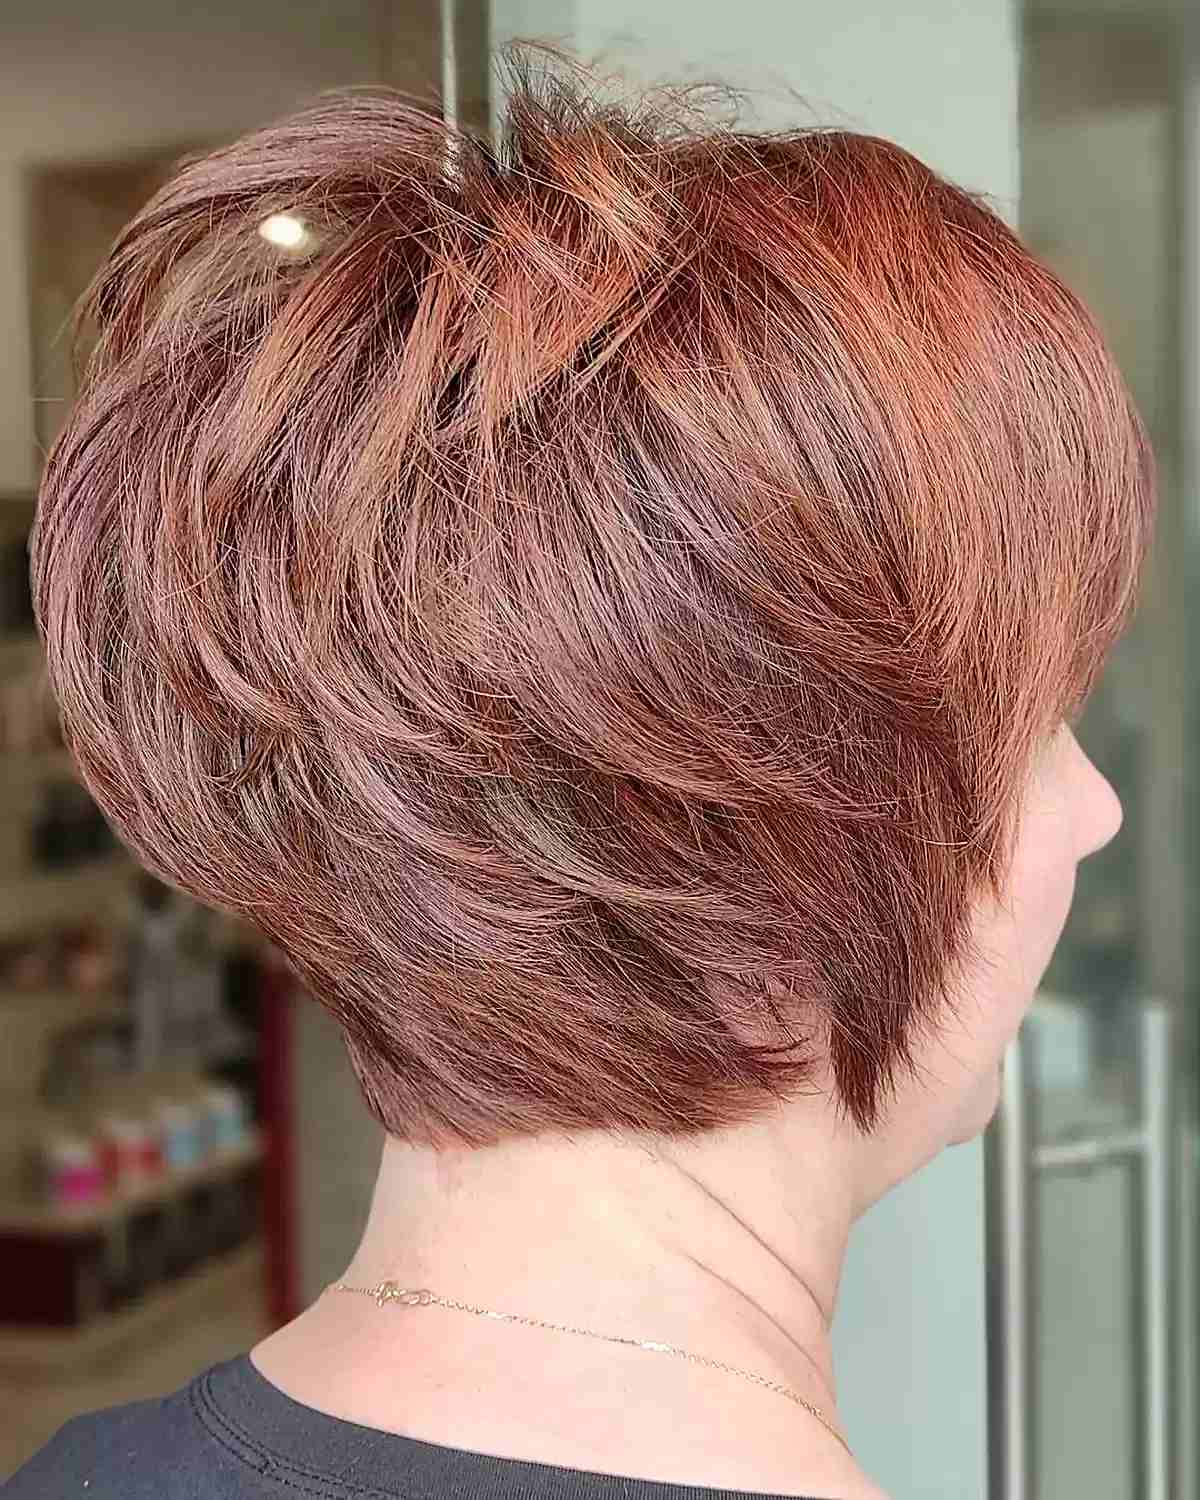 Shaggy Reddish Brown Long Pixie for ladies with short hair 